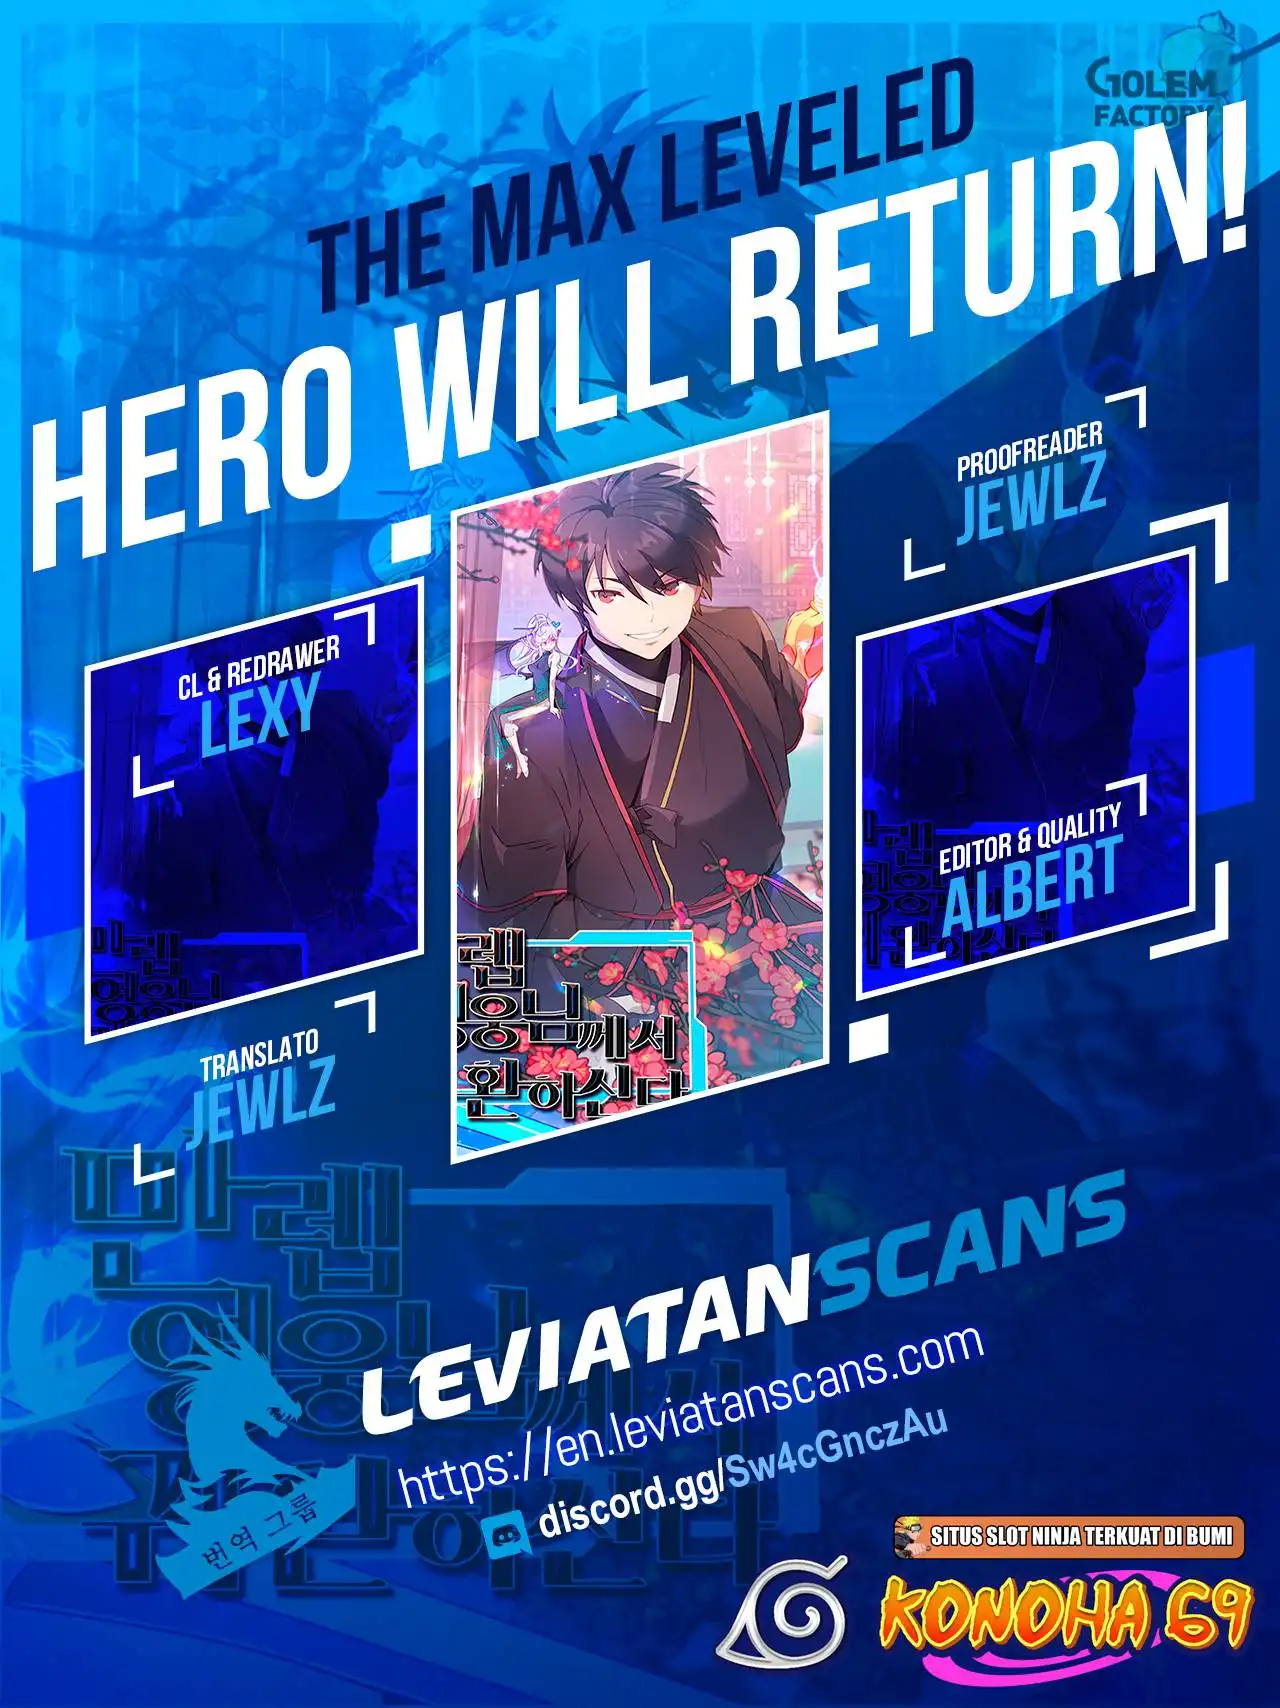 The MAX leveled hero will return! Chapter 130